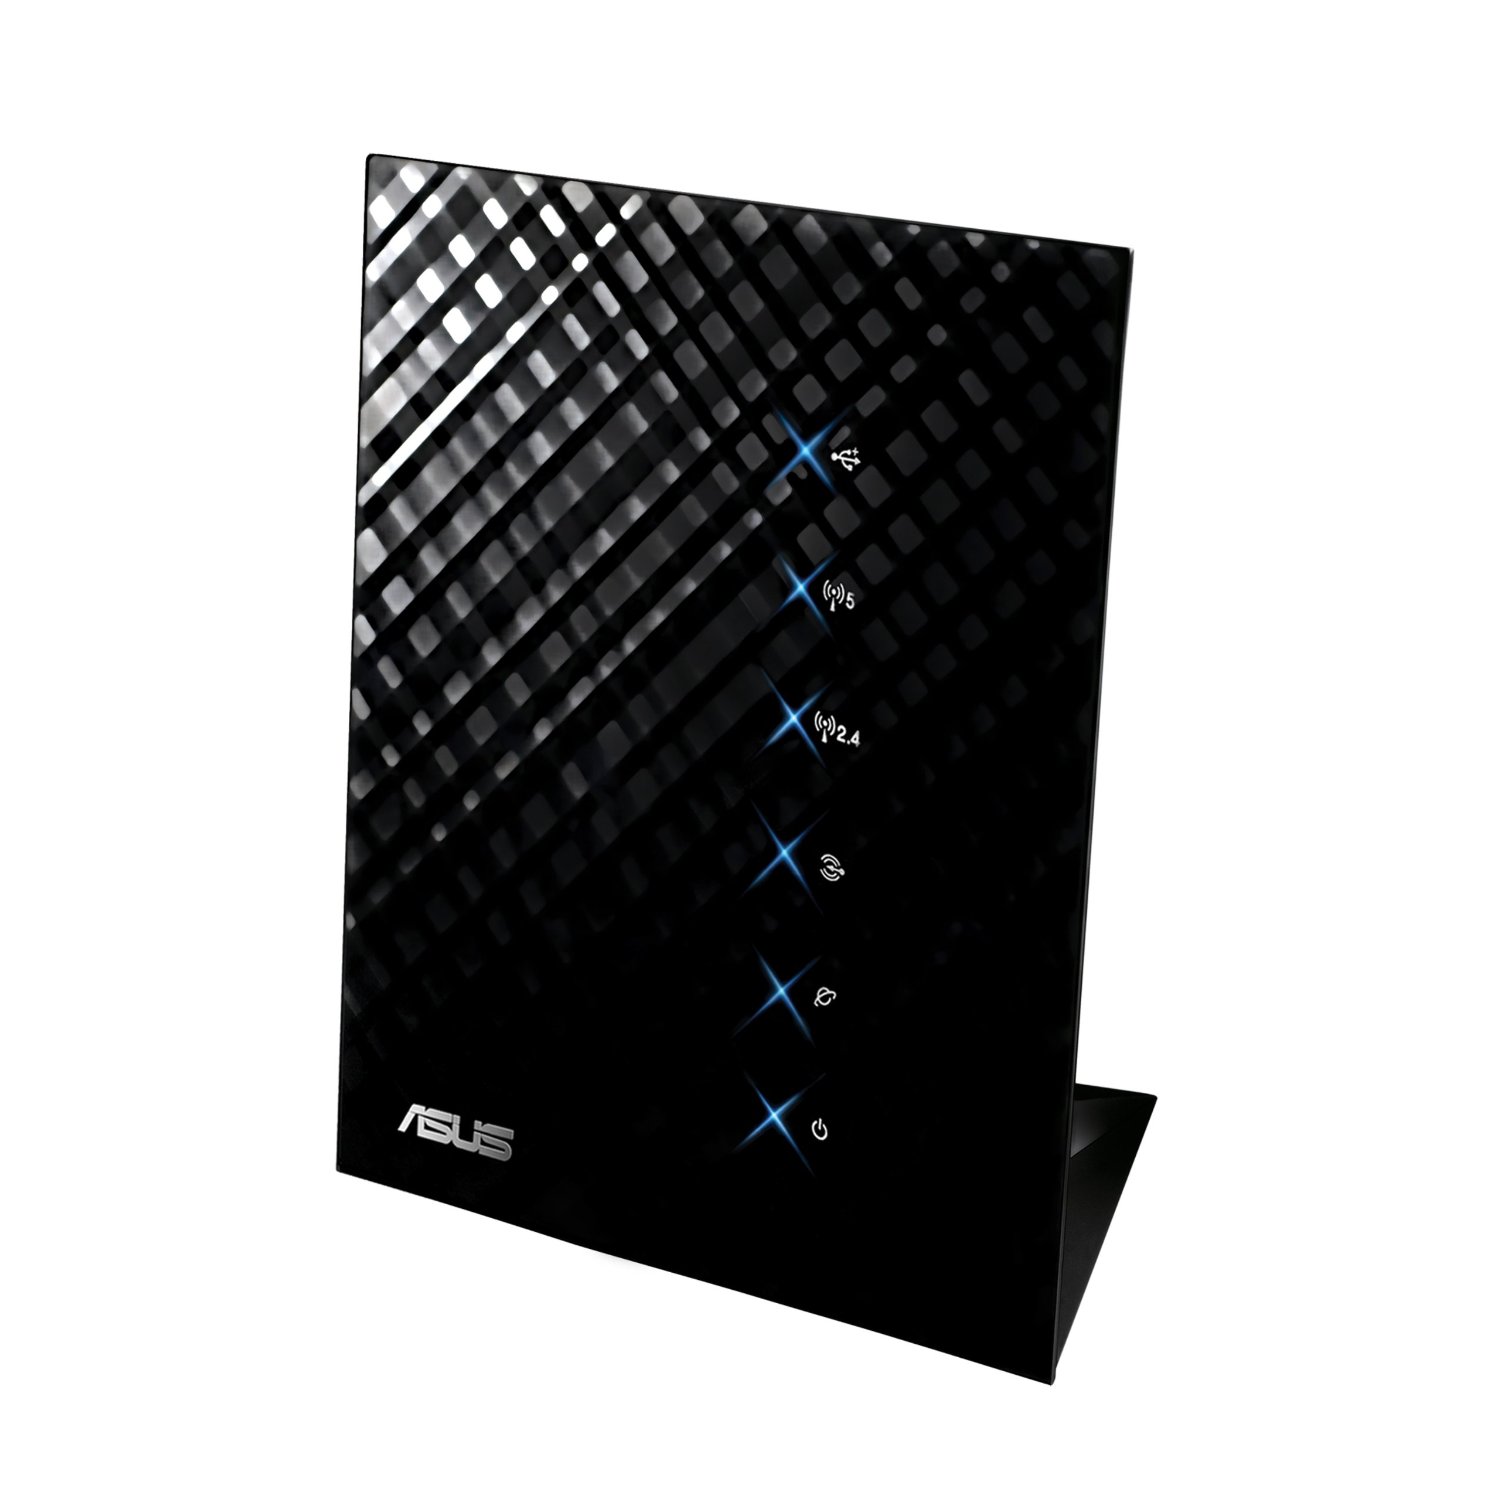 http://thetechjournal.com/wp-content/uploads/images/1109/1316084009-asus-black-diamond-dual-band-wirelessn-600-router-1.jpg